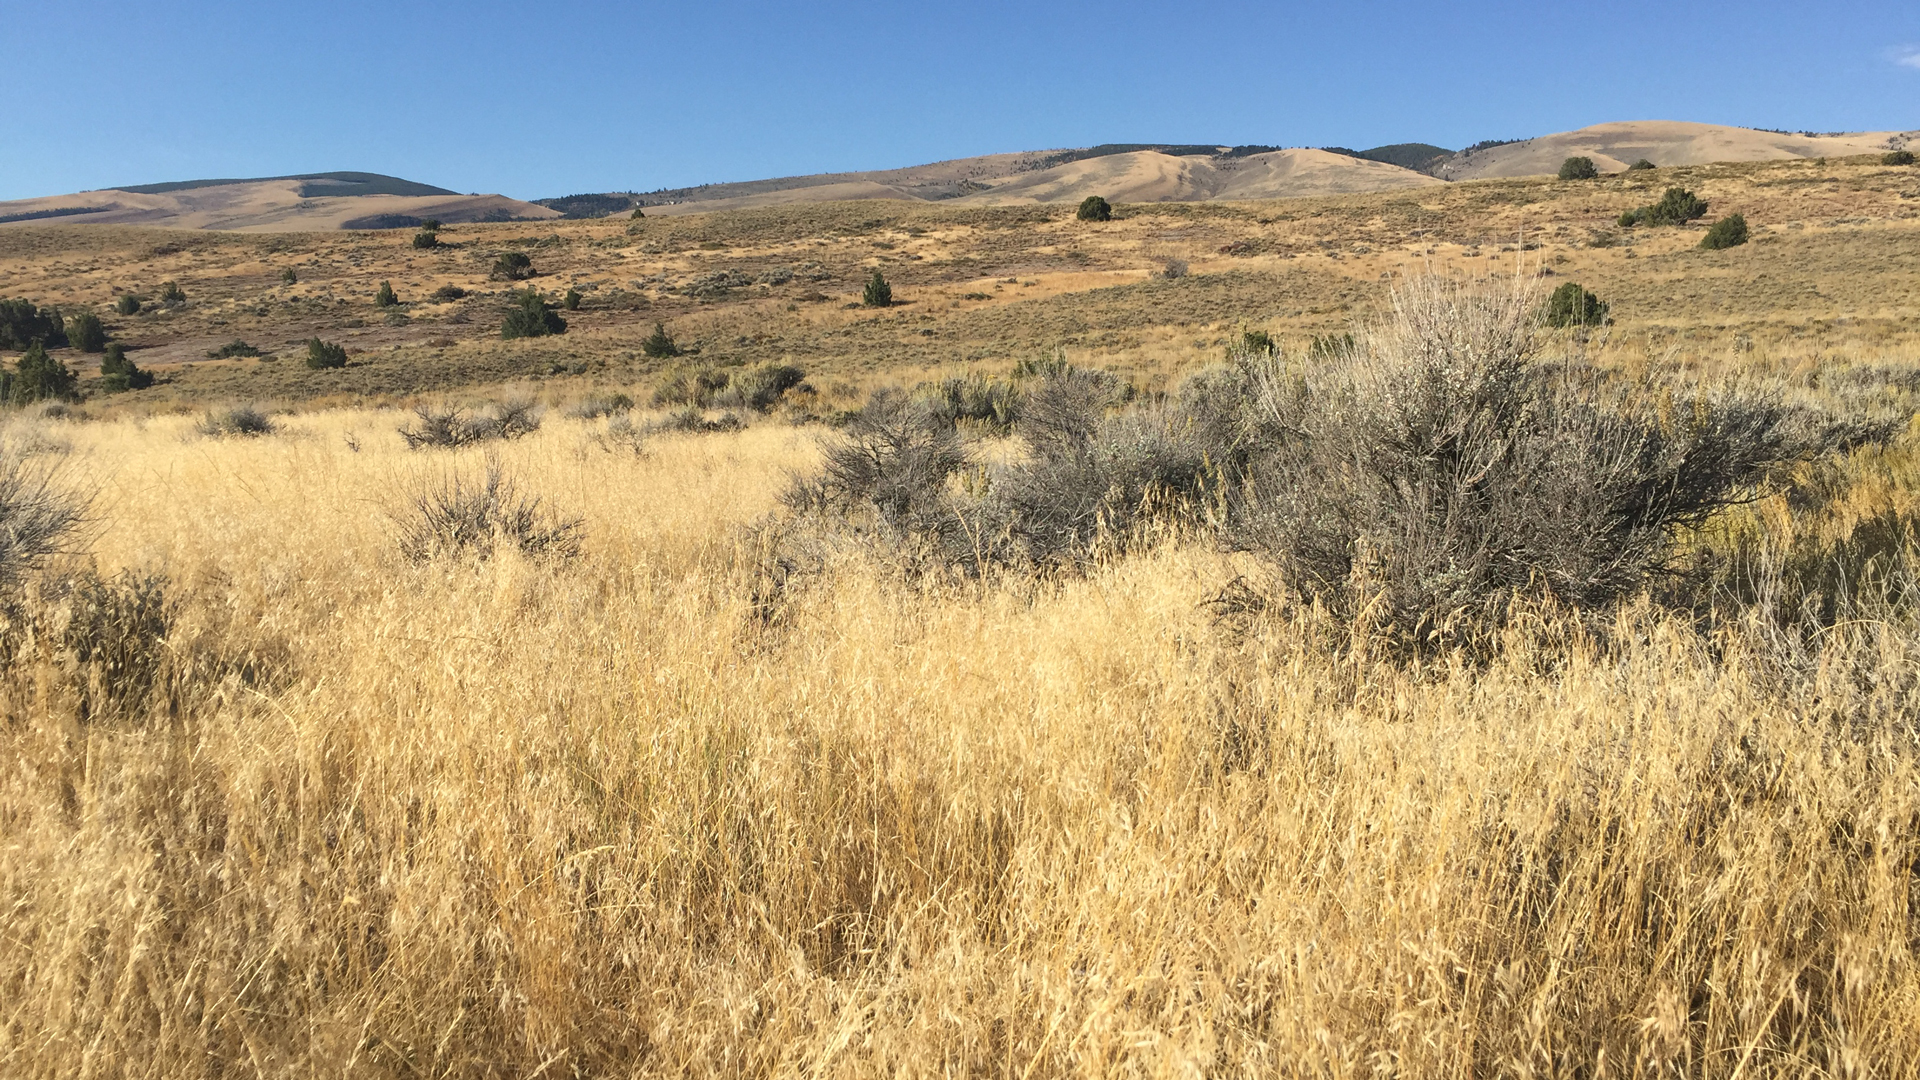 Cheatgrass in the foreground invading sagebrush habitat in Wyoming. Cheatgrass is harming sage-grouse by making its habitat much more flammable. Photo © Holly Copeland.